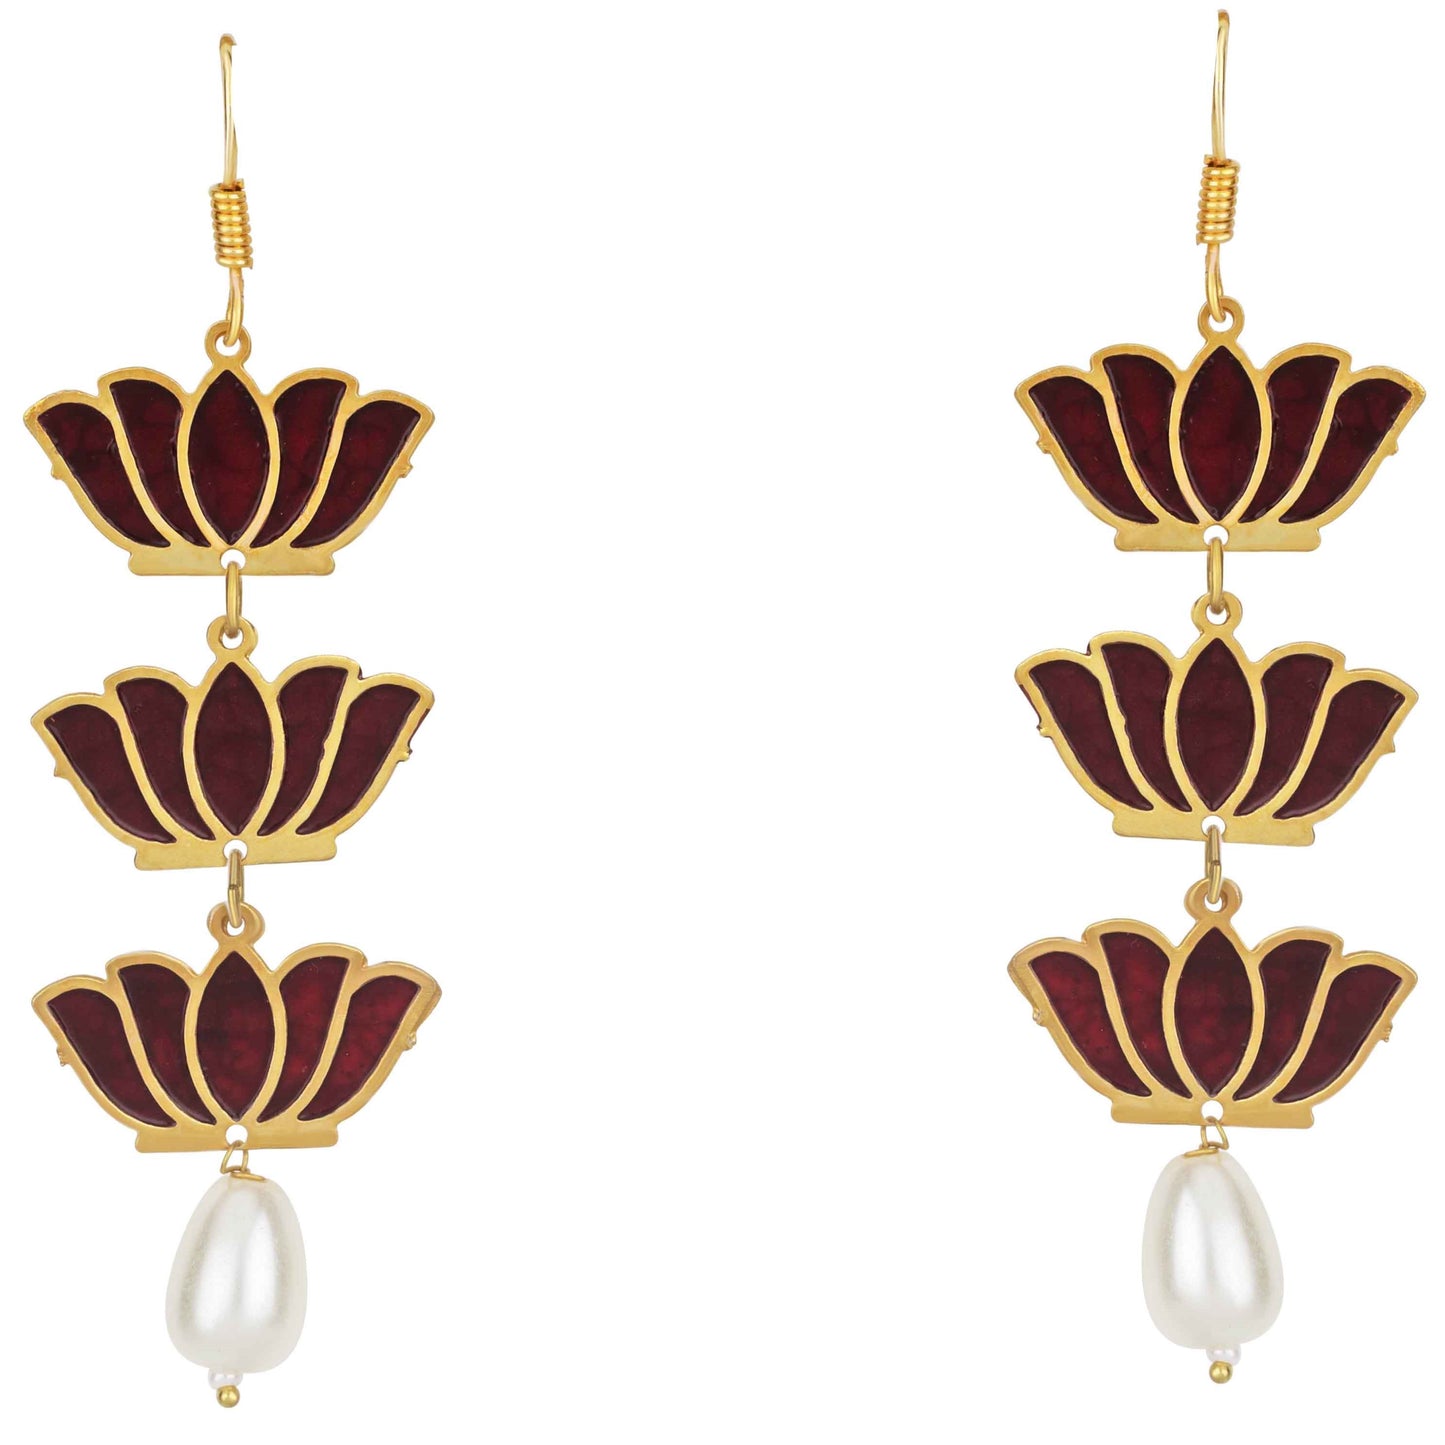 Bdiva 18K Gold Plated Light Weight Red Lotus Earrings.